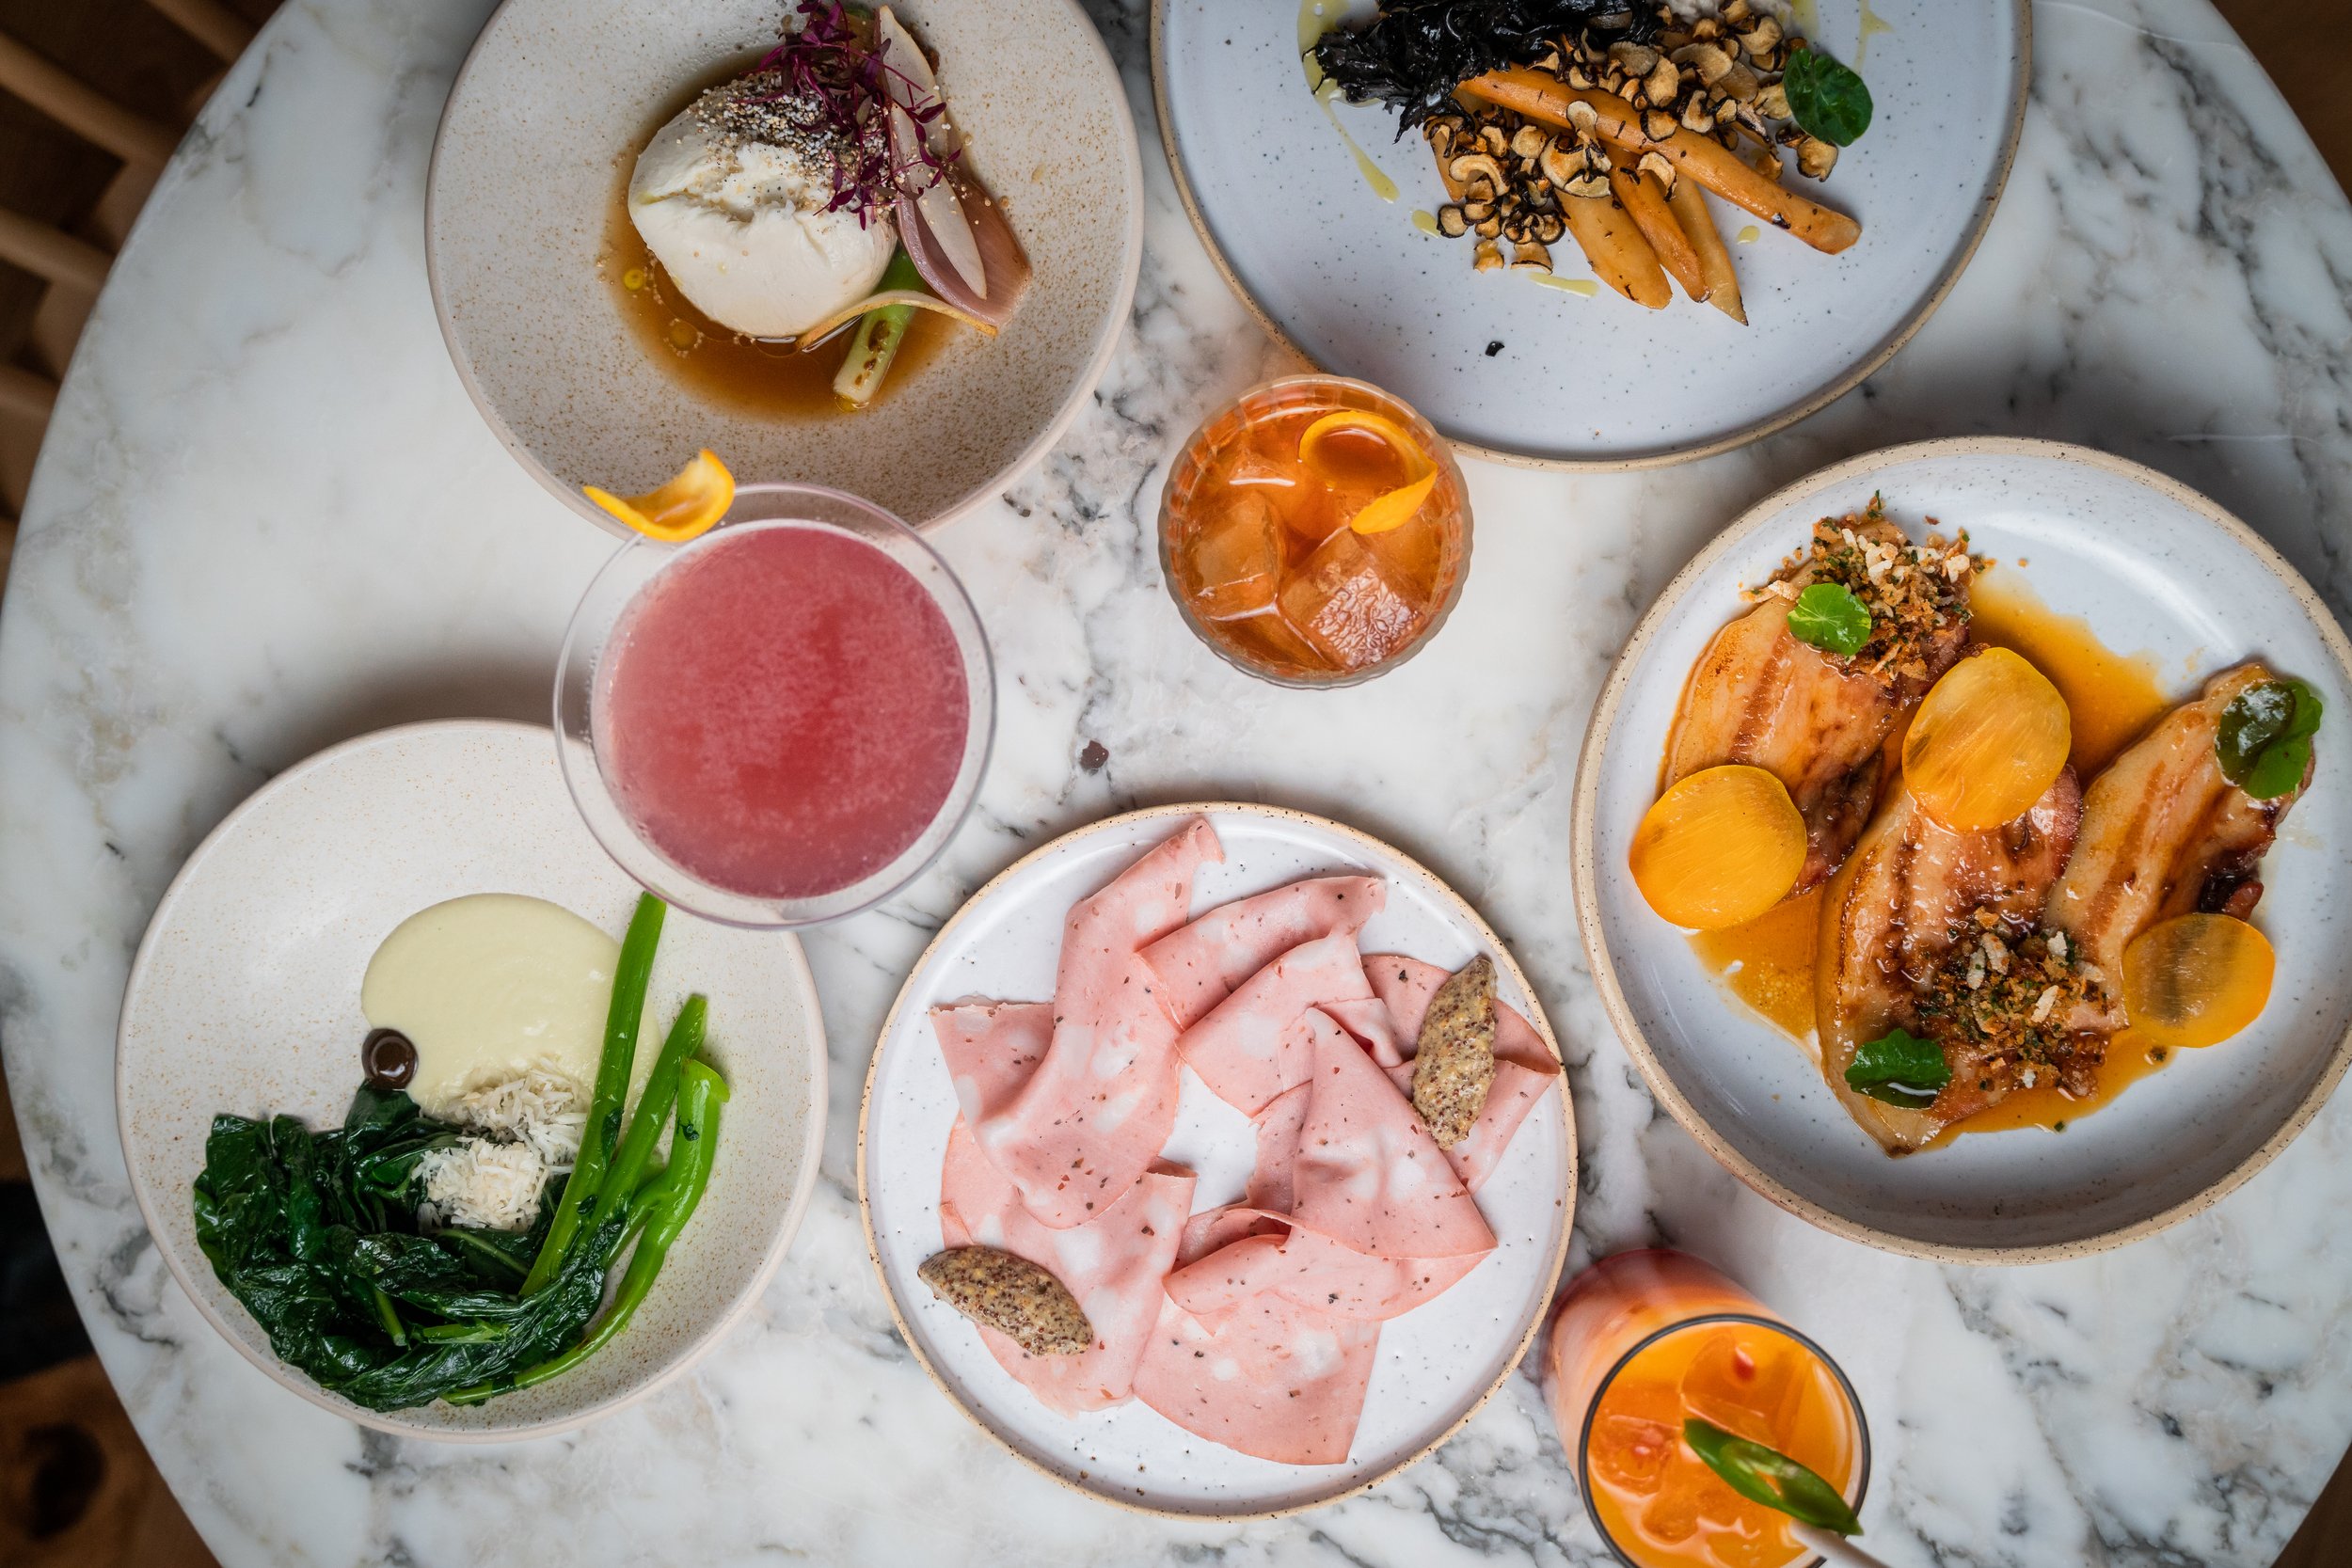 Plates of mortadella, charred broccoli, burrata, and roasted carrots on a marble tabletop